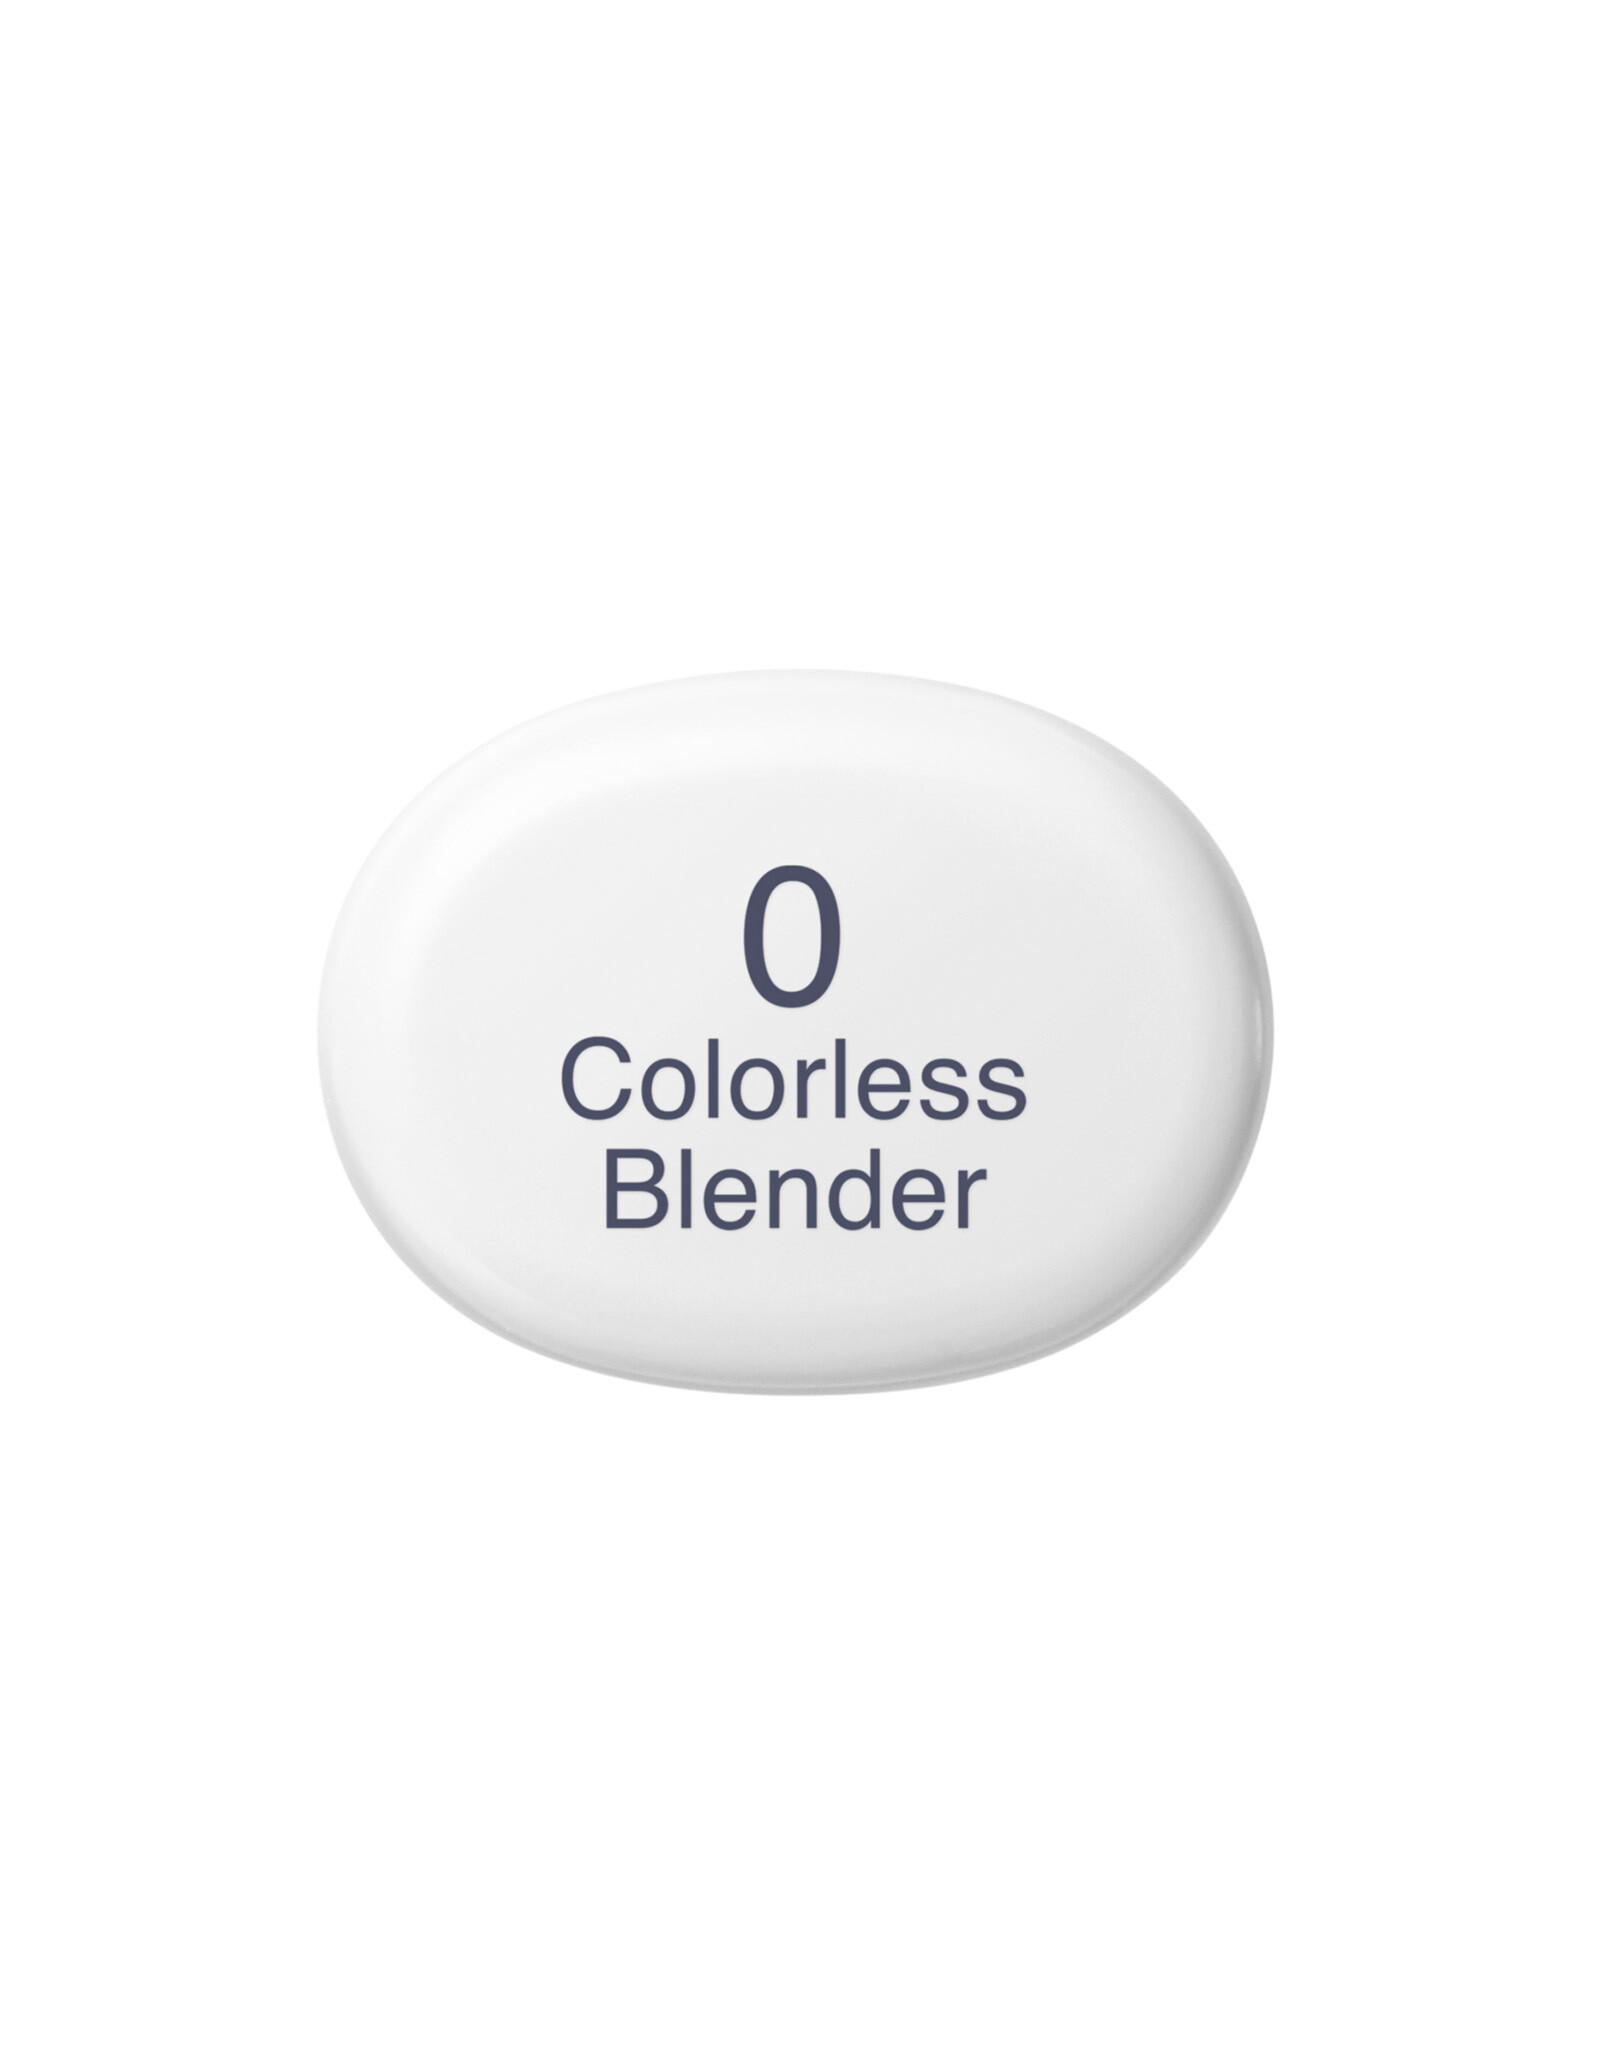 COPIC COPIC Sketch Colorless Blender